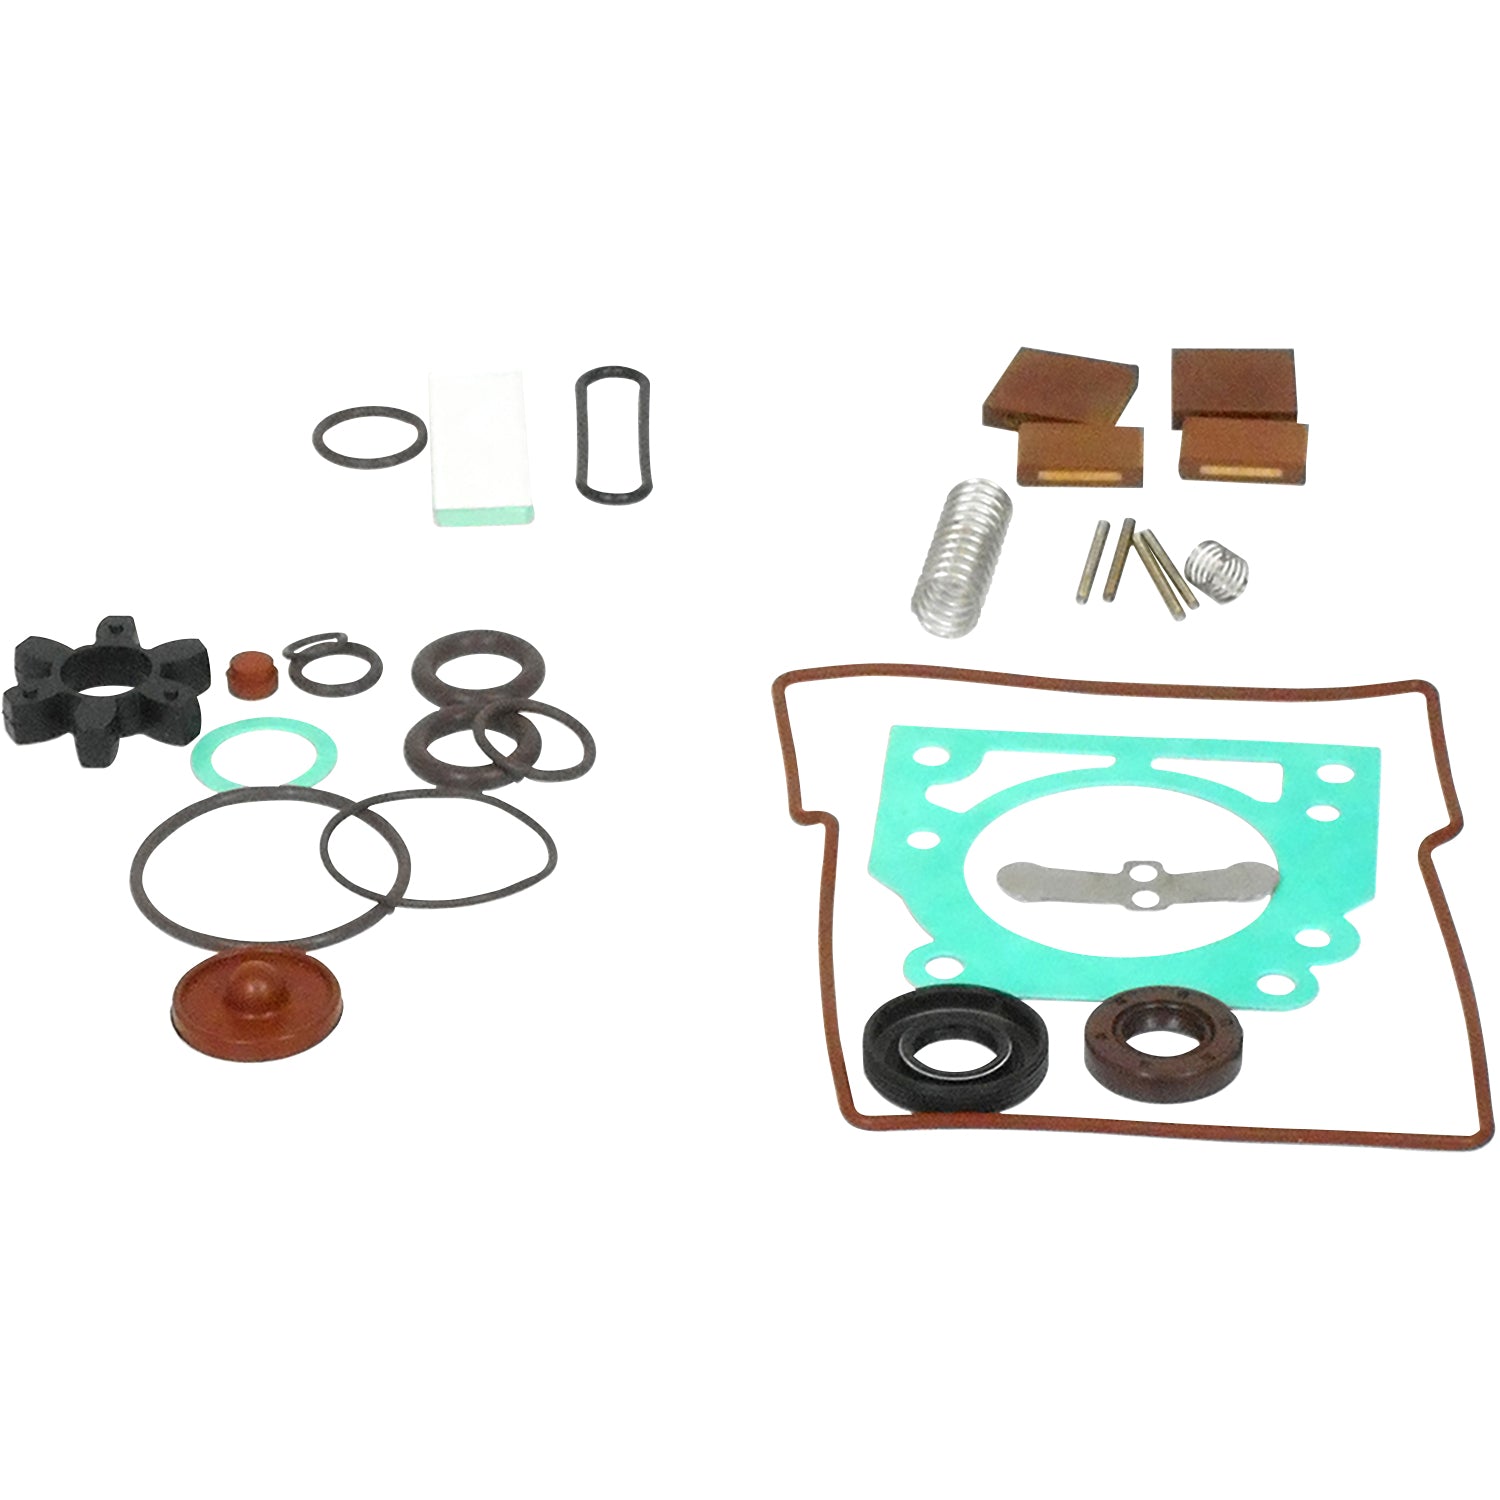 Welch Vacuum Service Kit for CRVpro 8 Vacuum Pump, S3079-99